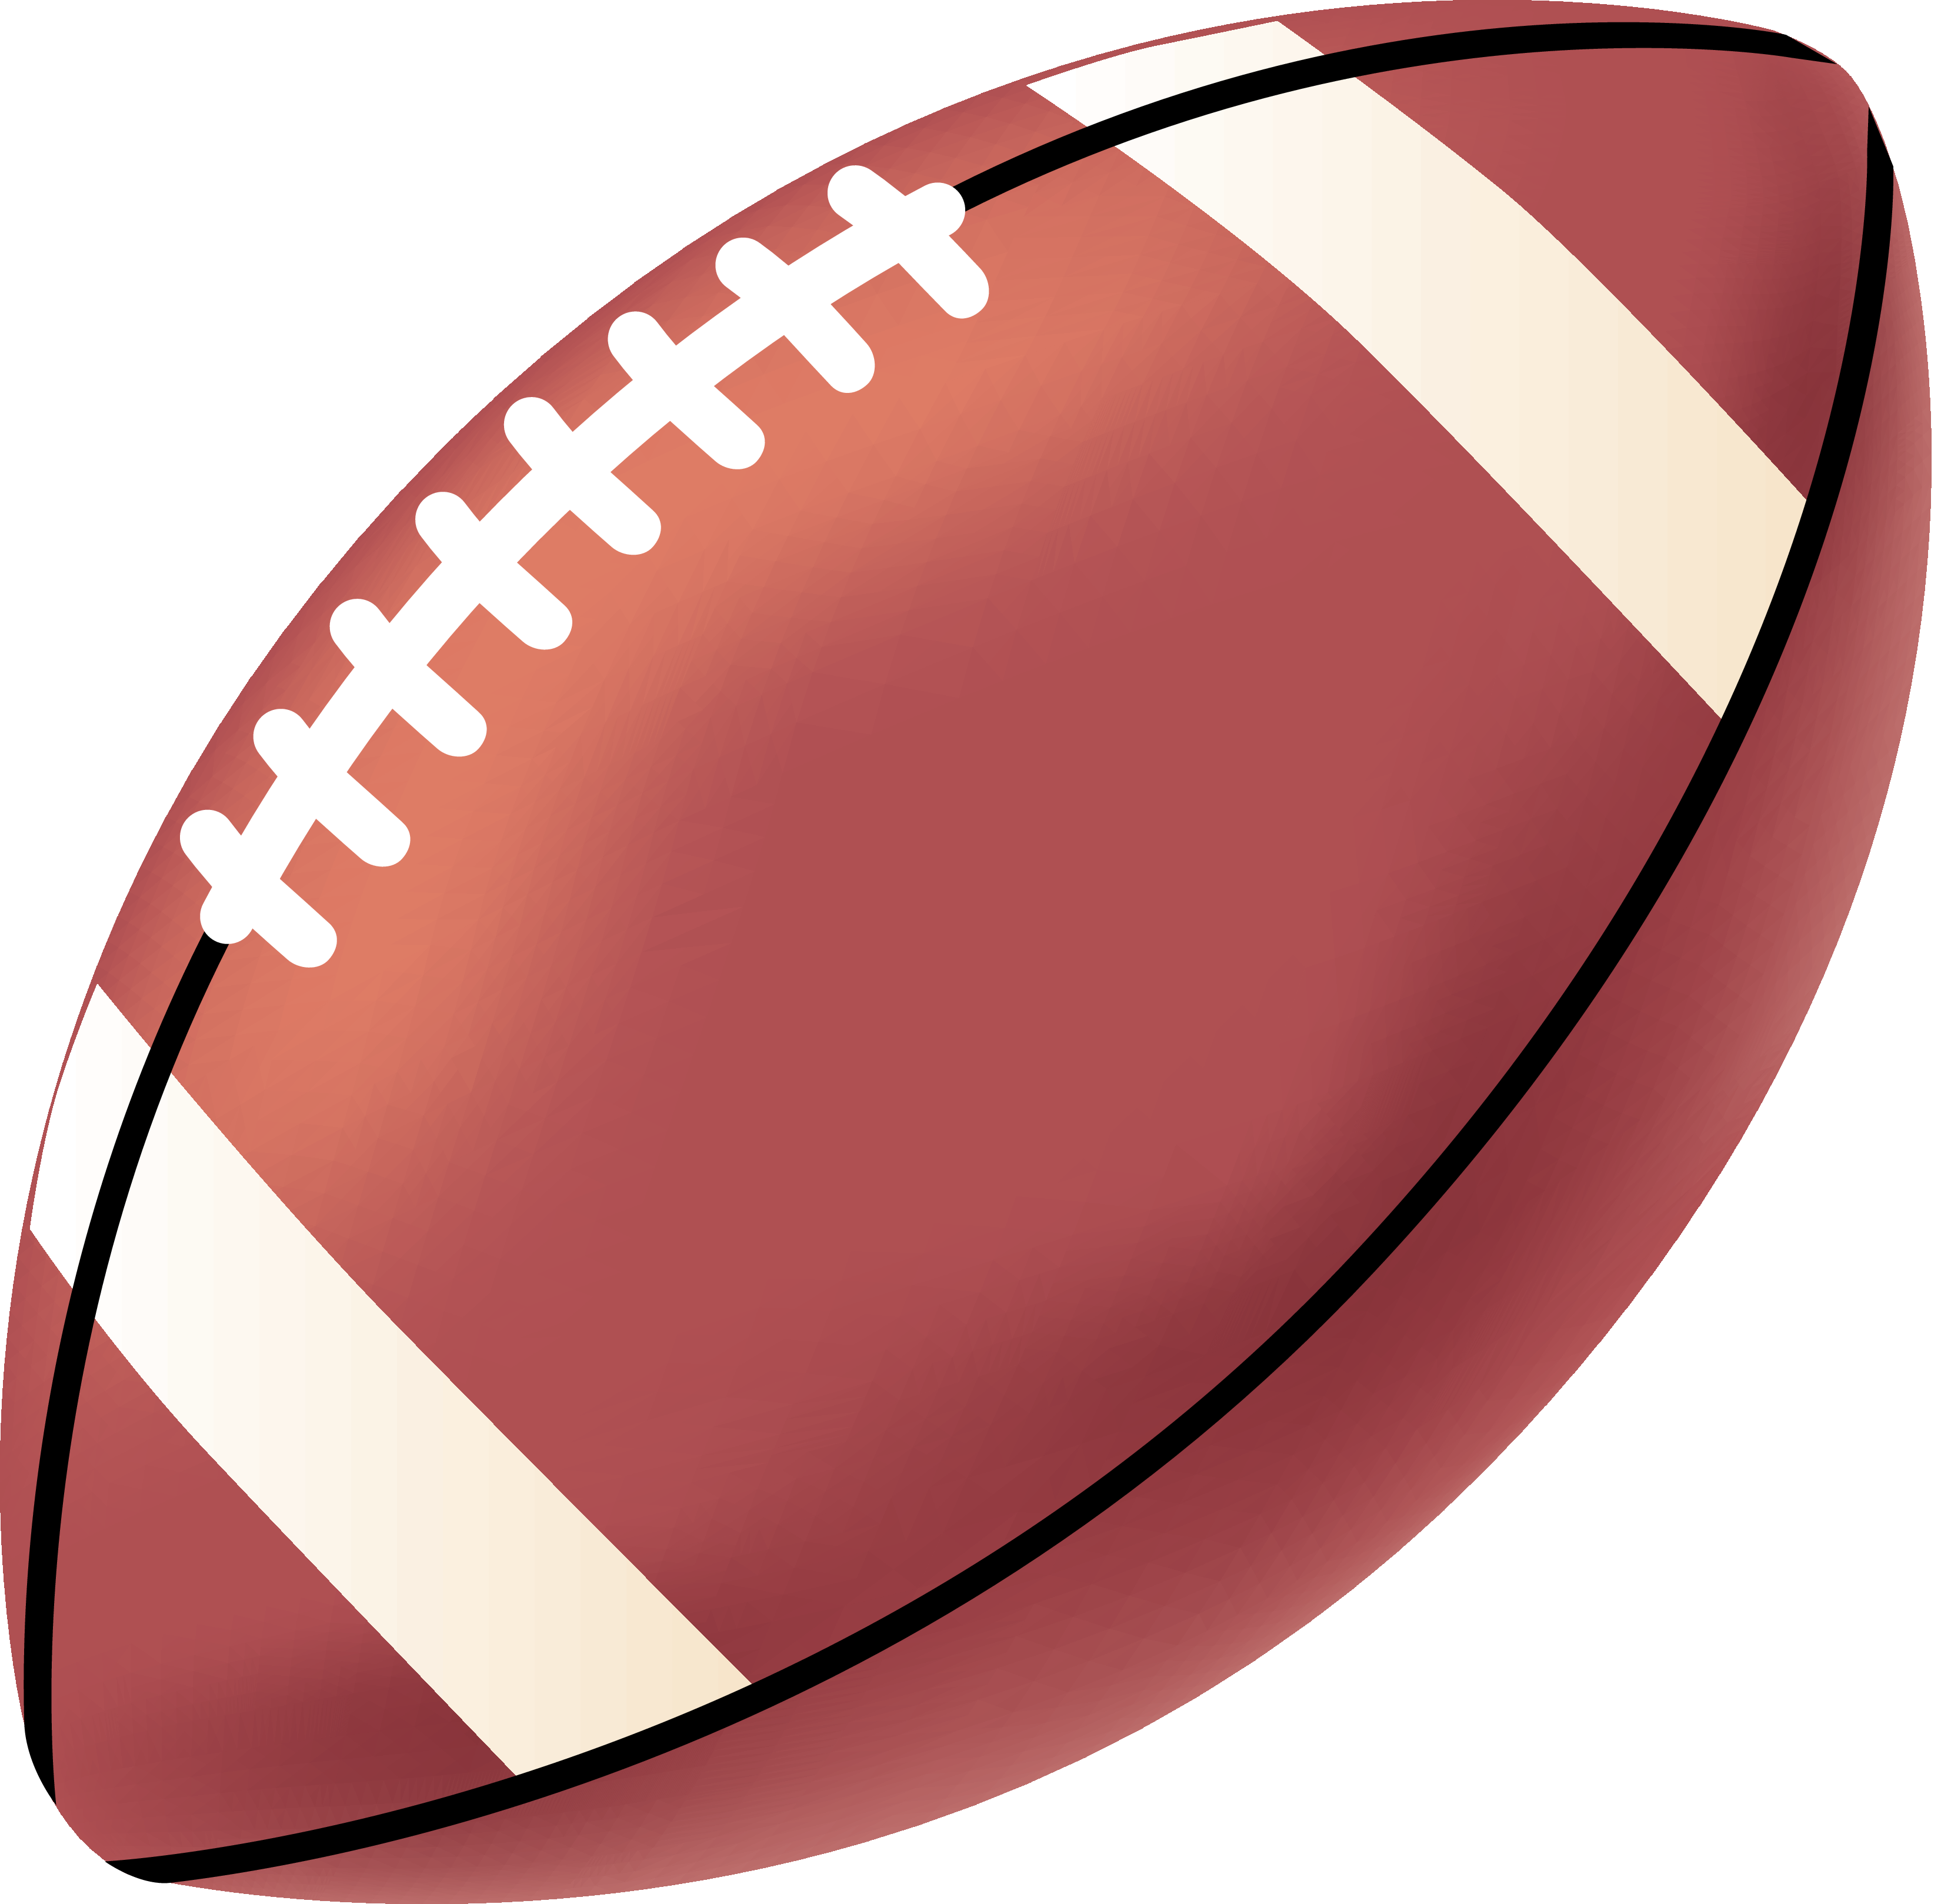 football clipart black and wh